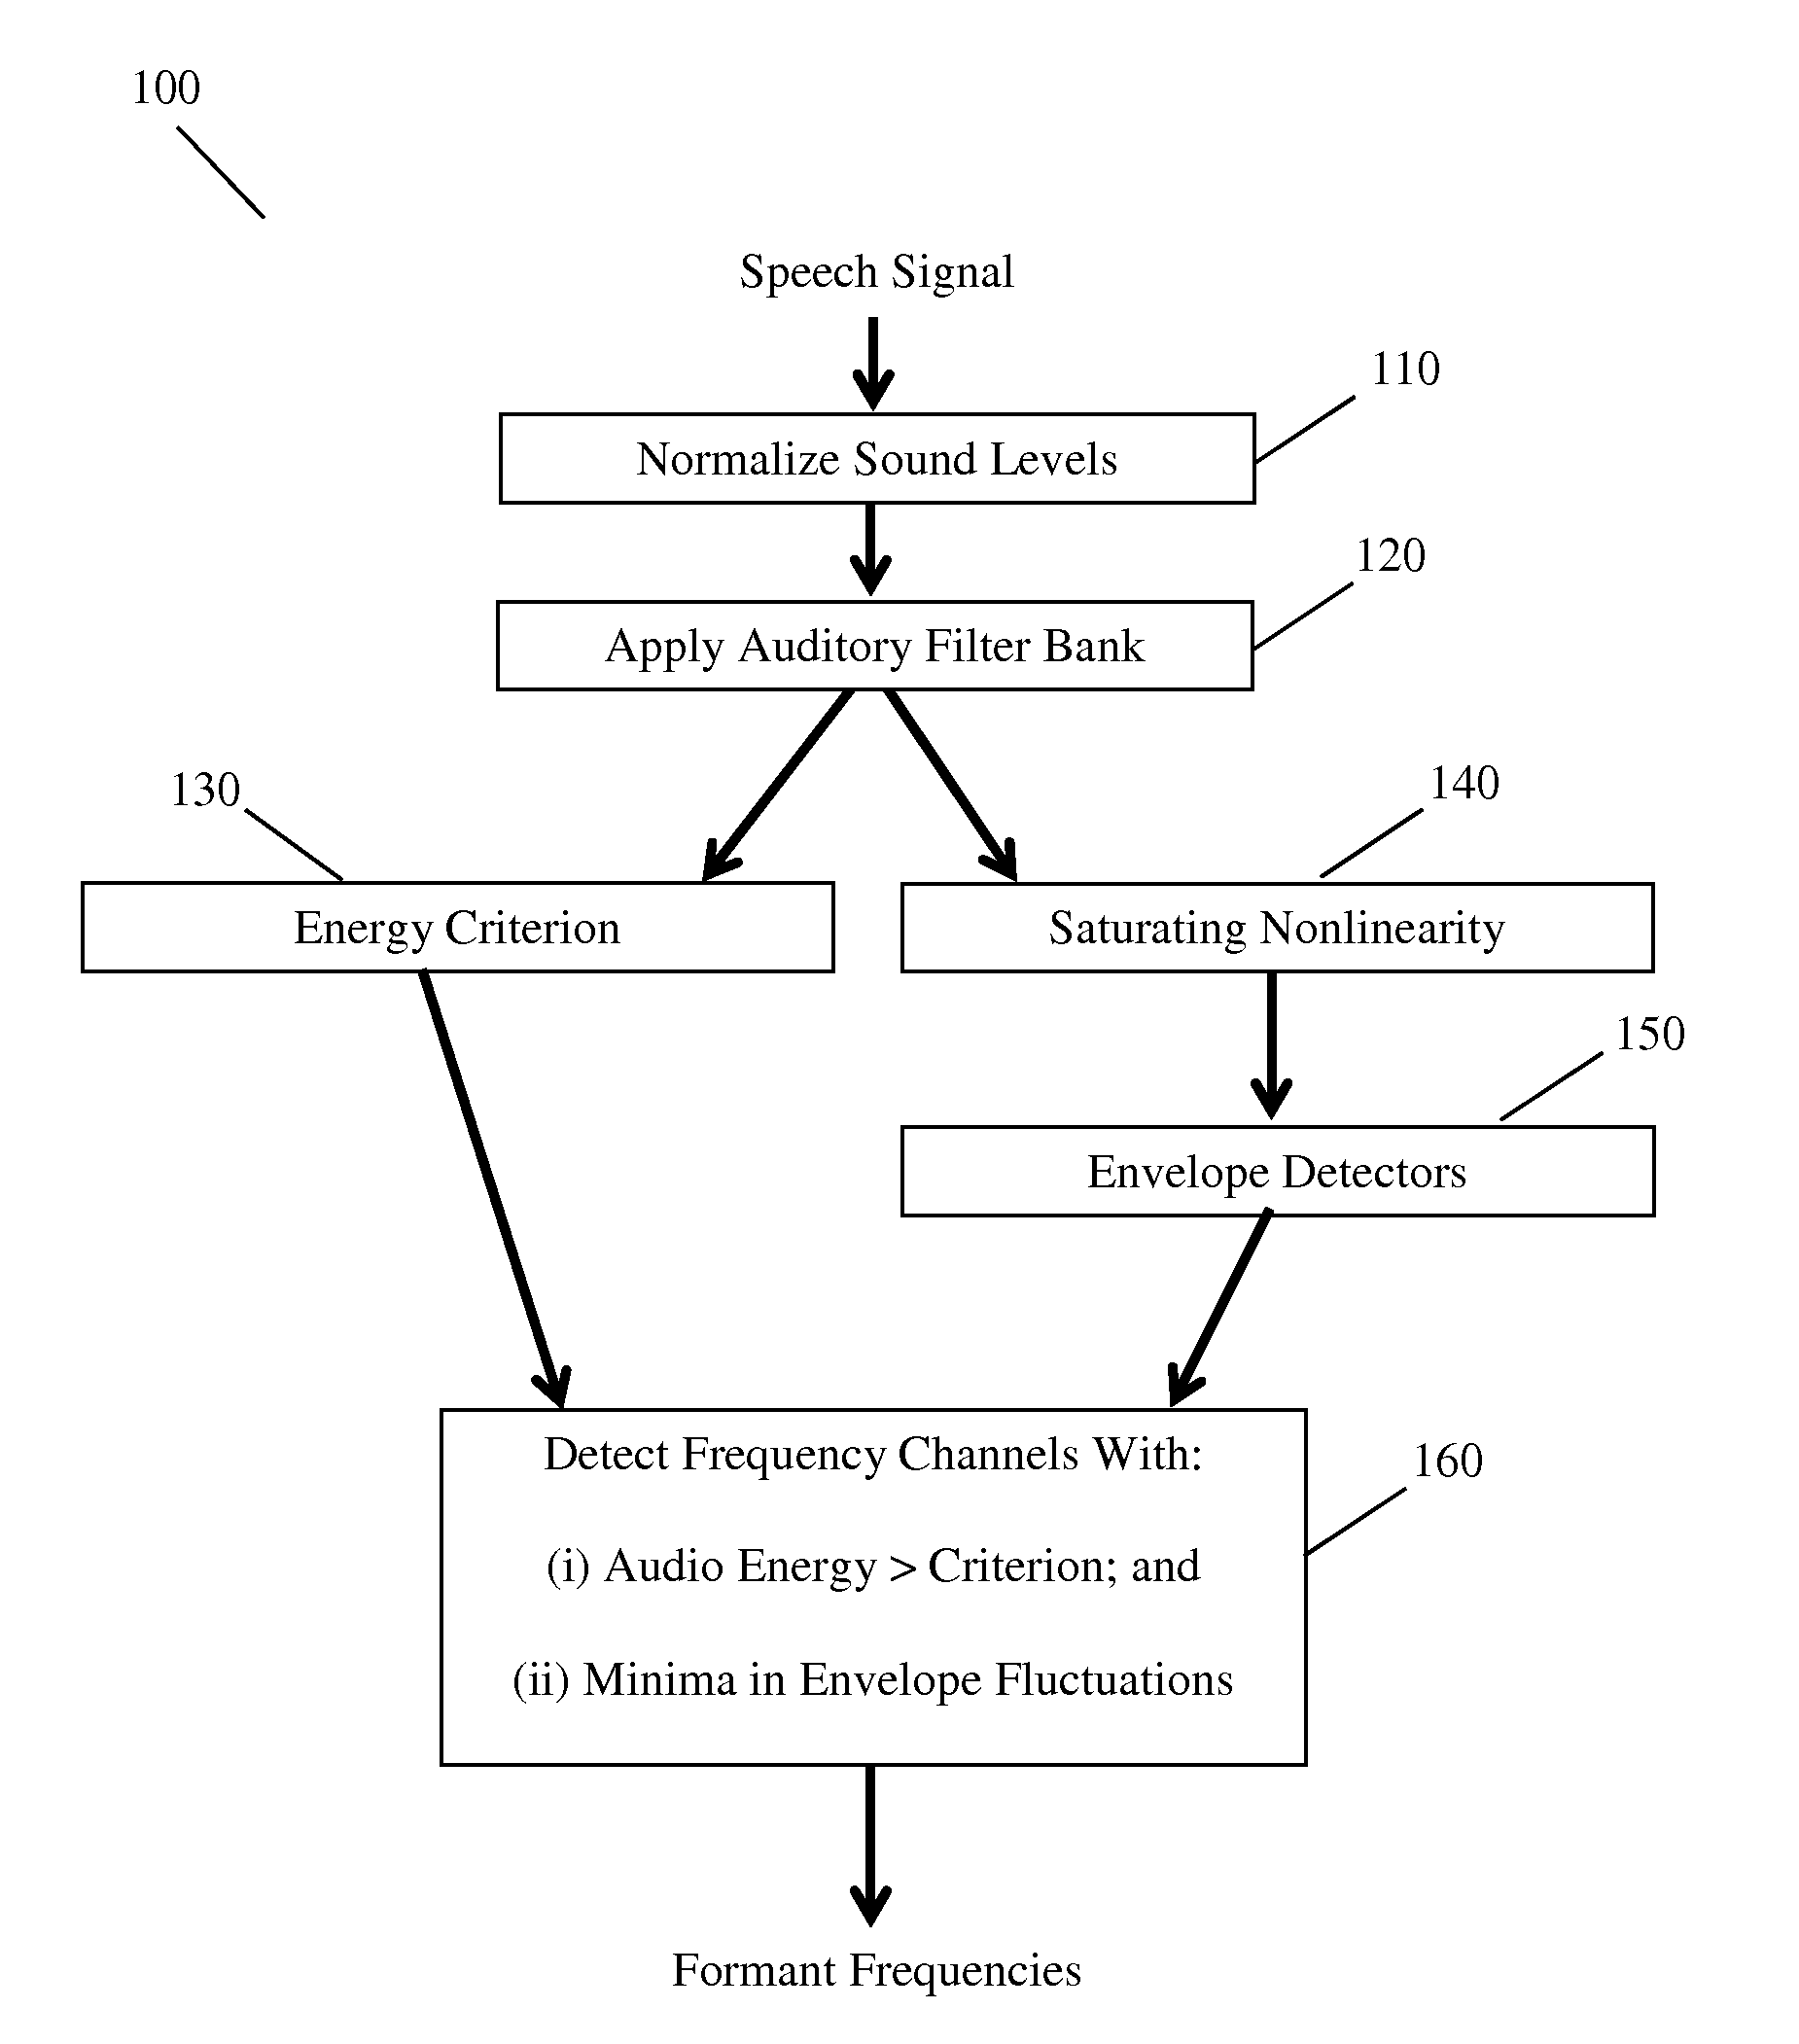 Method for detecting, identifying, and enhancing formant frequencies in voiced speech